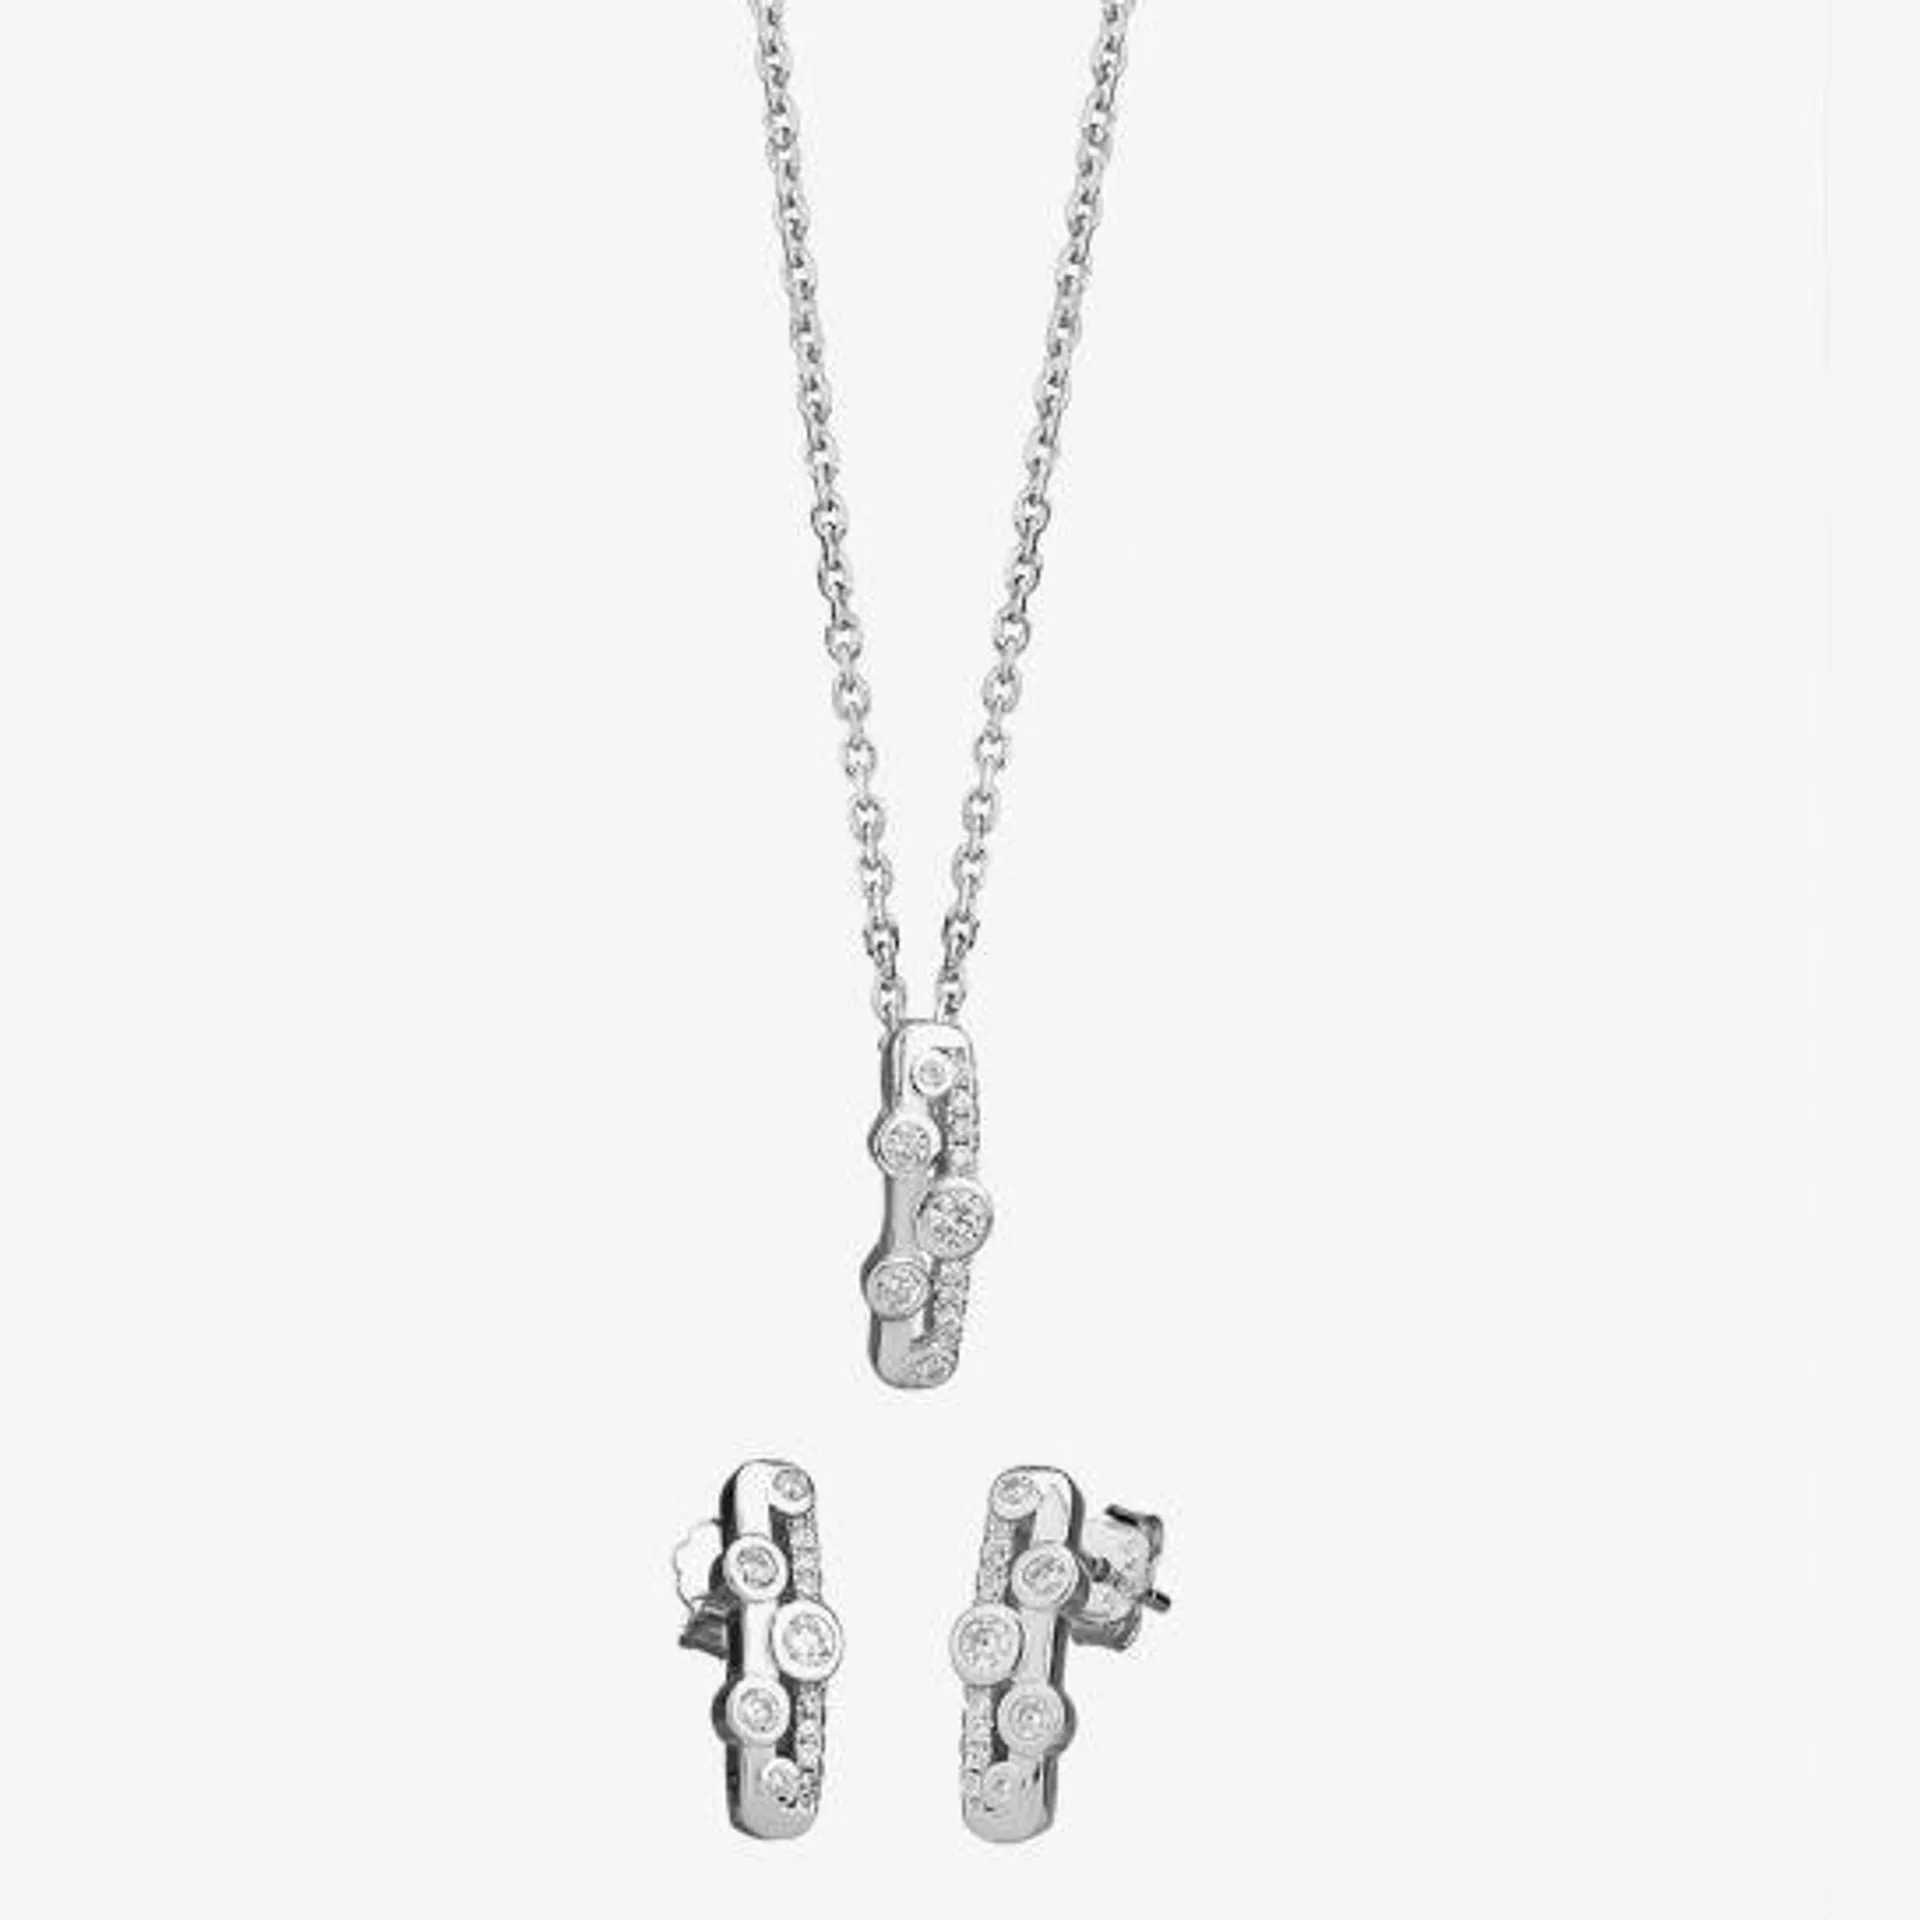 Silver Cubic Zirconia Twin Row Pendant and Earring Set